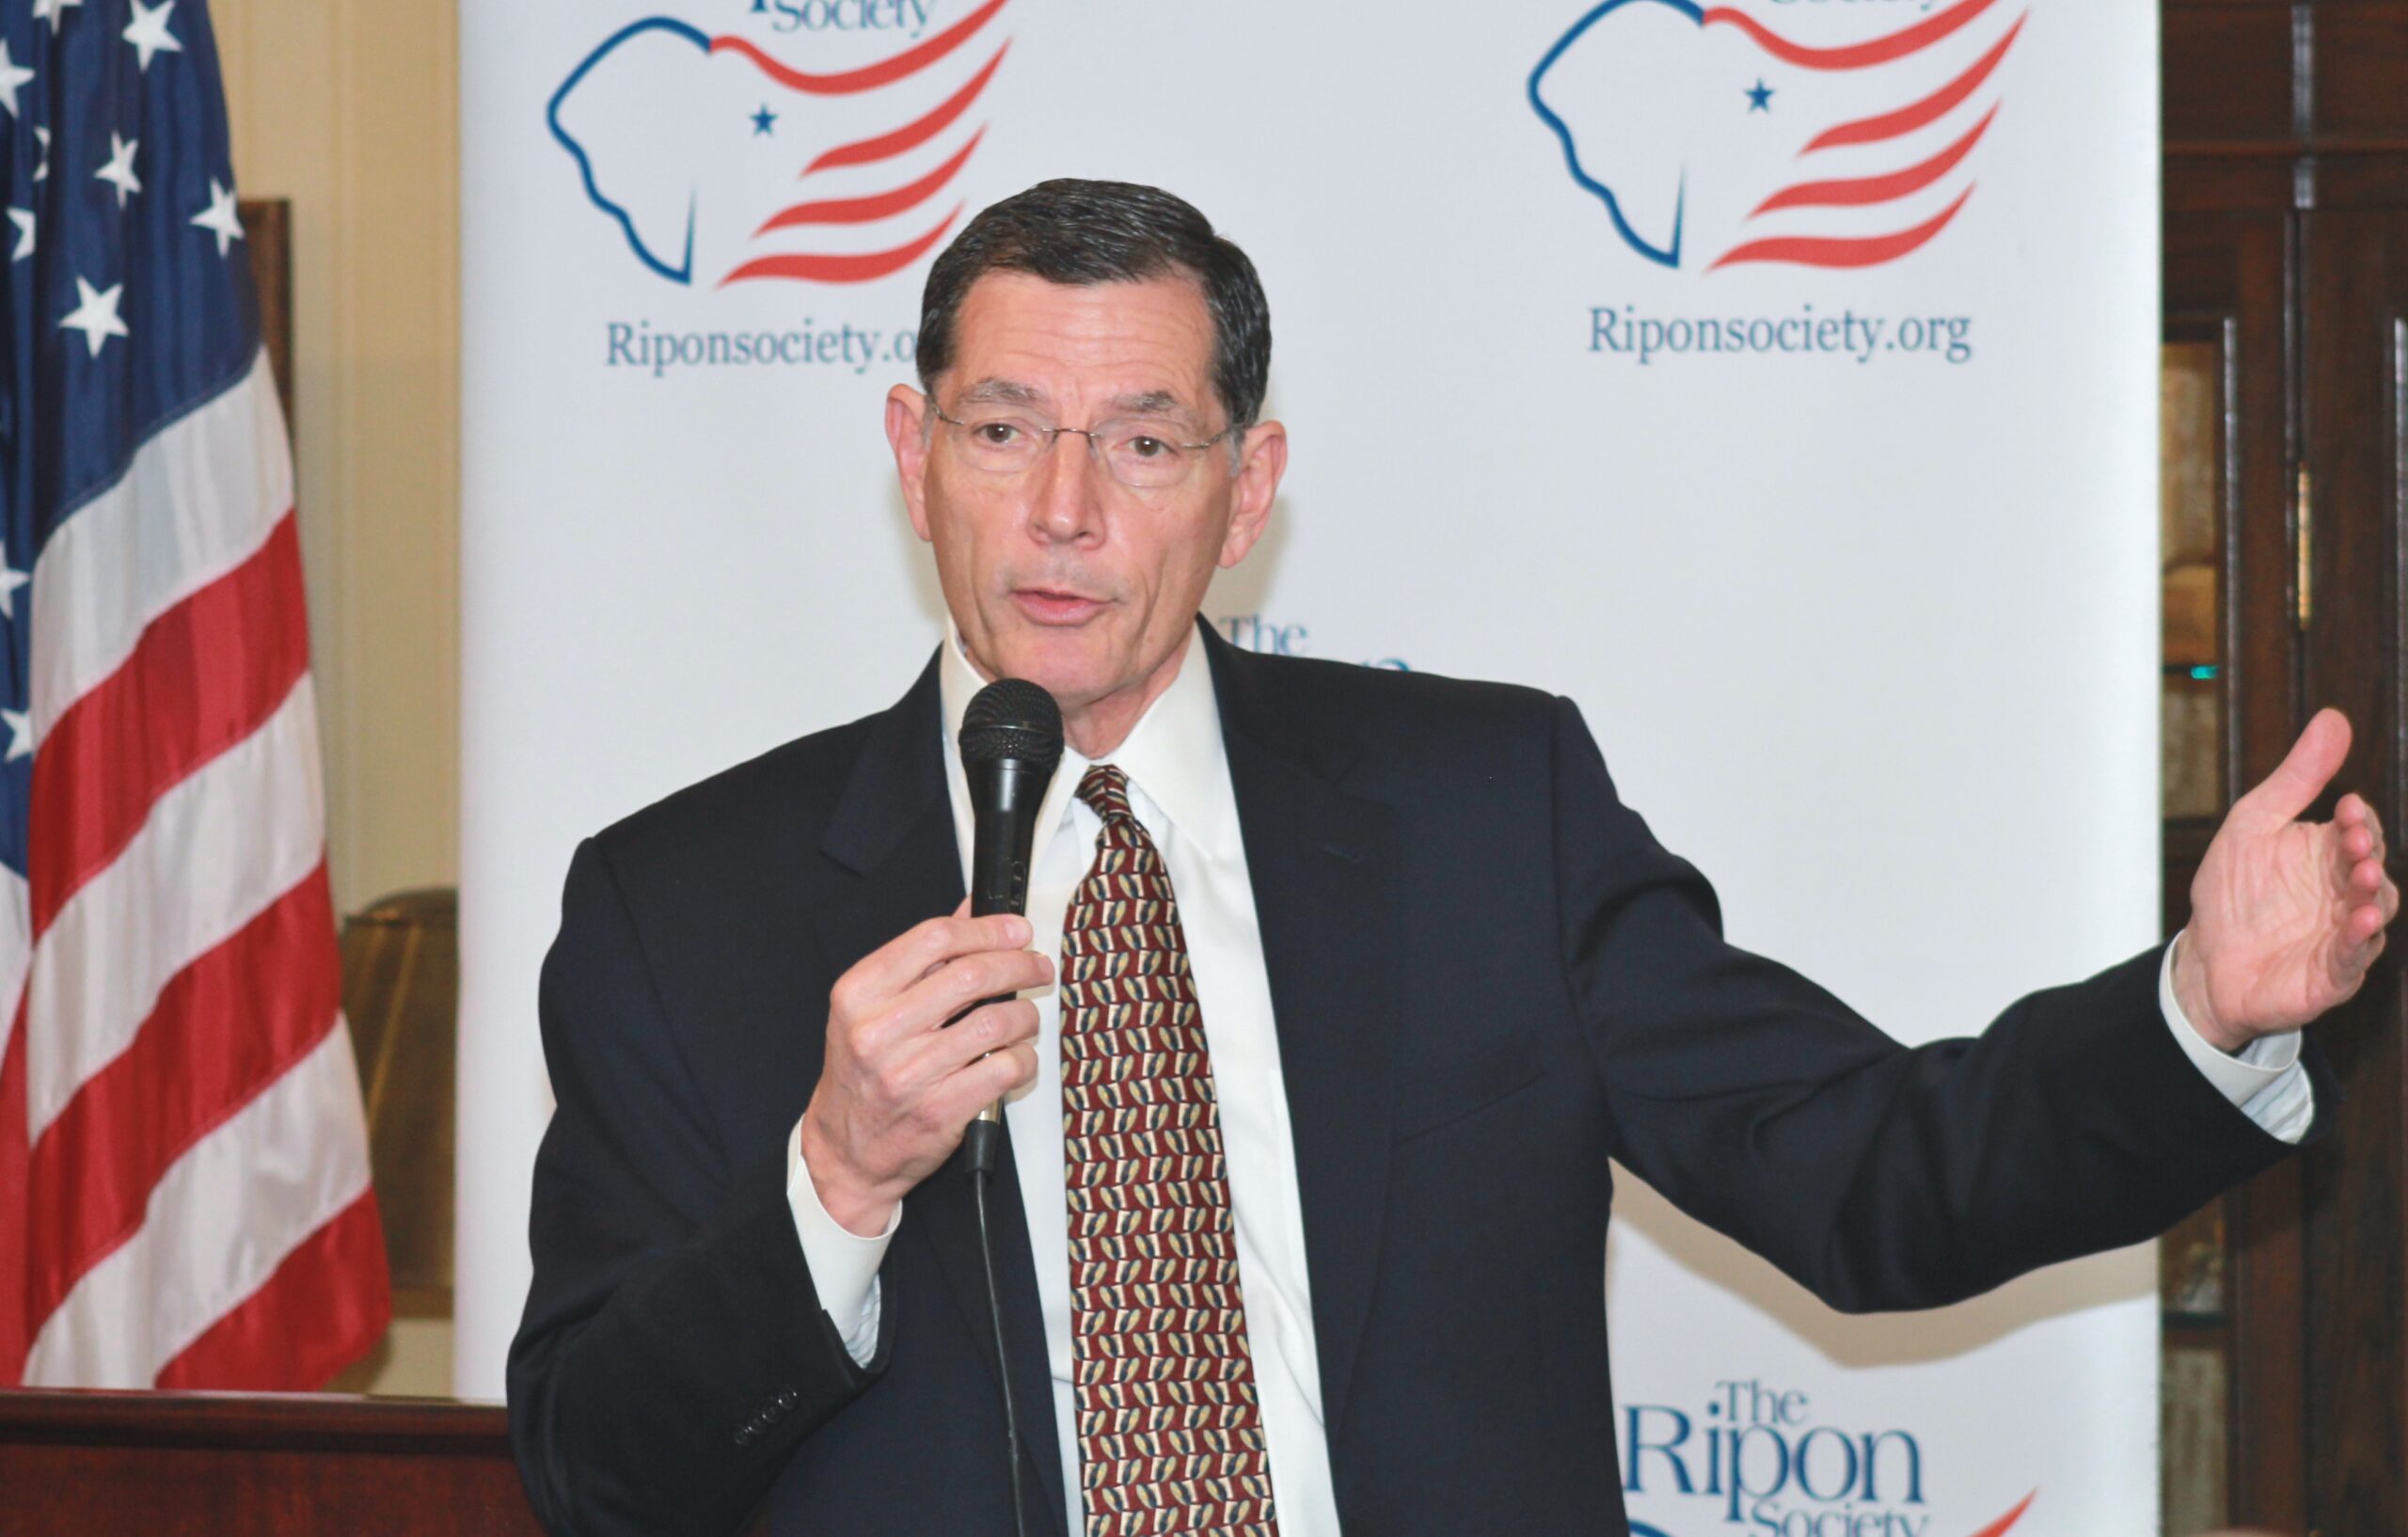 Barrasso: After Years of Stalemate, Senate is Working Again